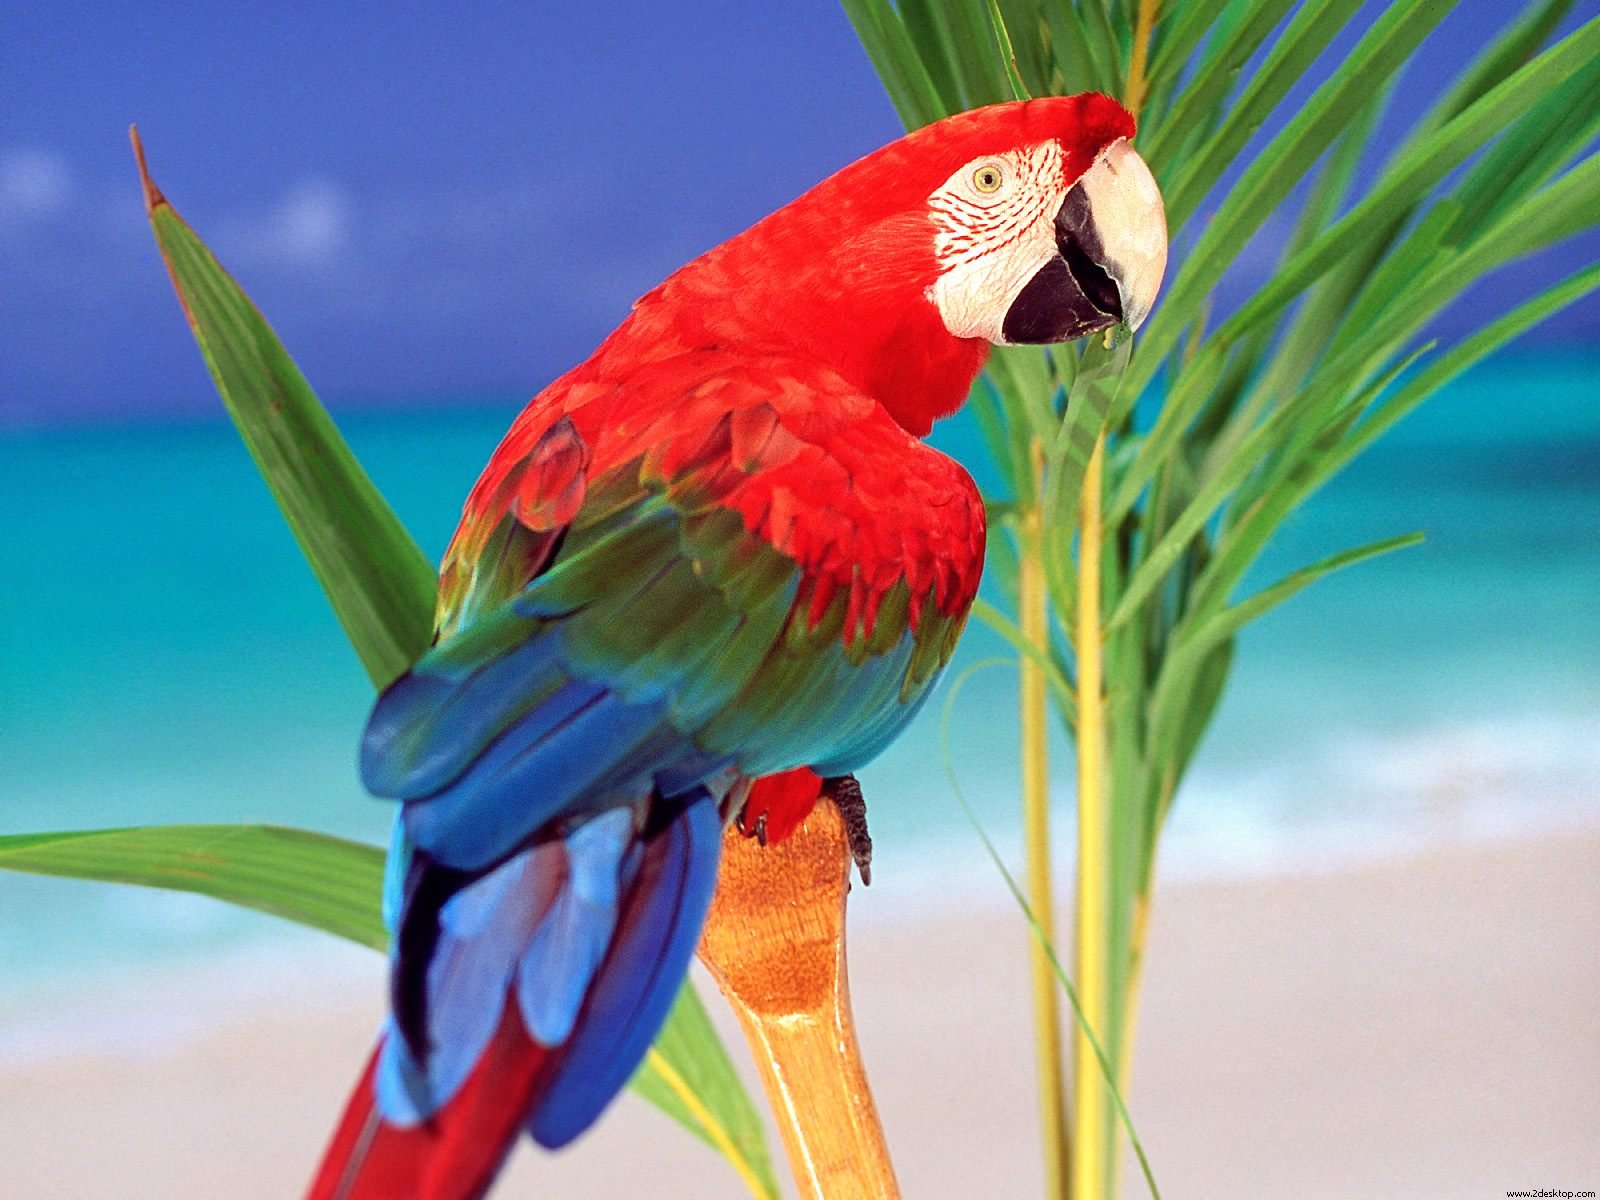 Parrots bird HD Wallpaper and video | Files Gallery